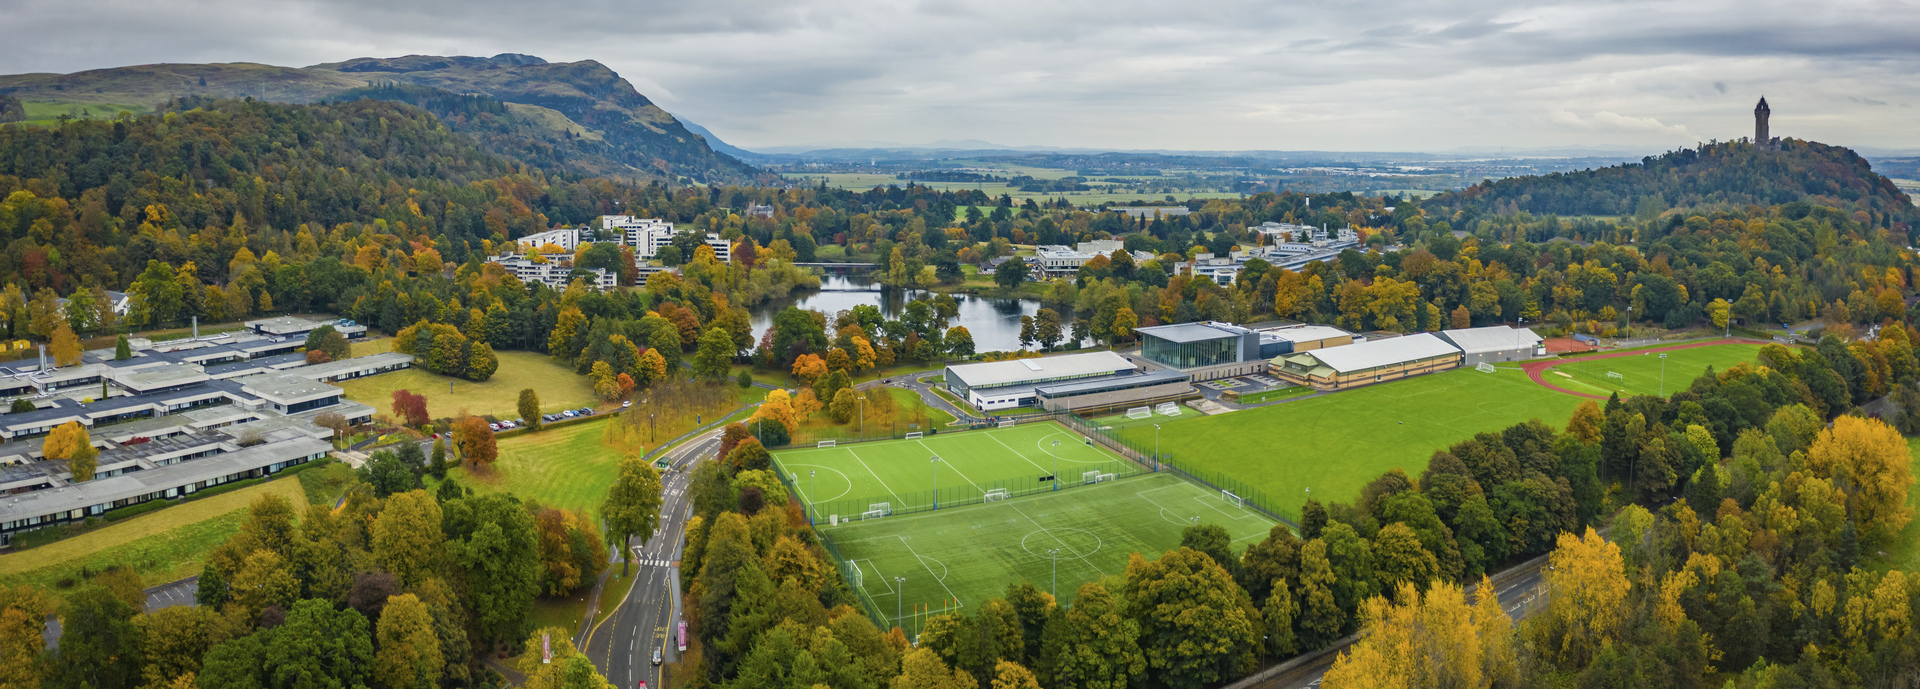 Drone photo of the University of Stirling campus